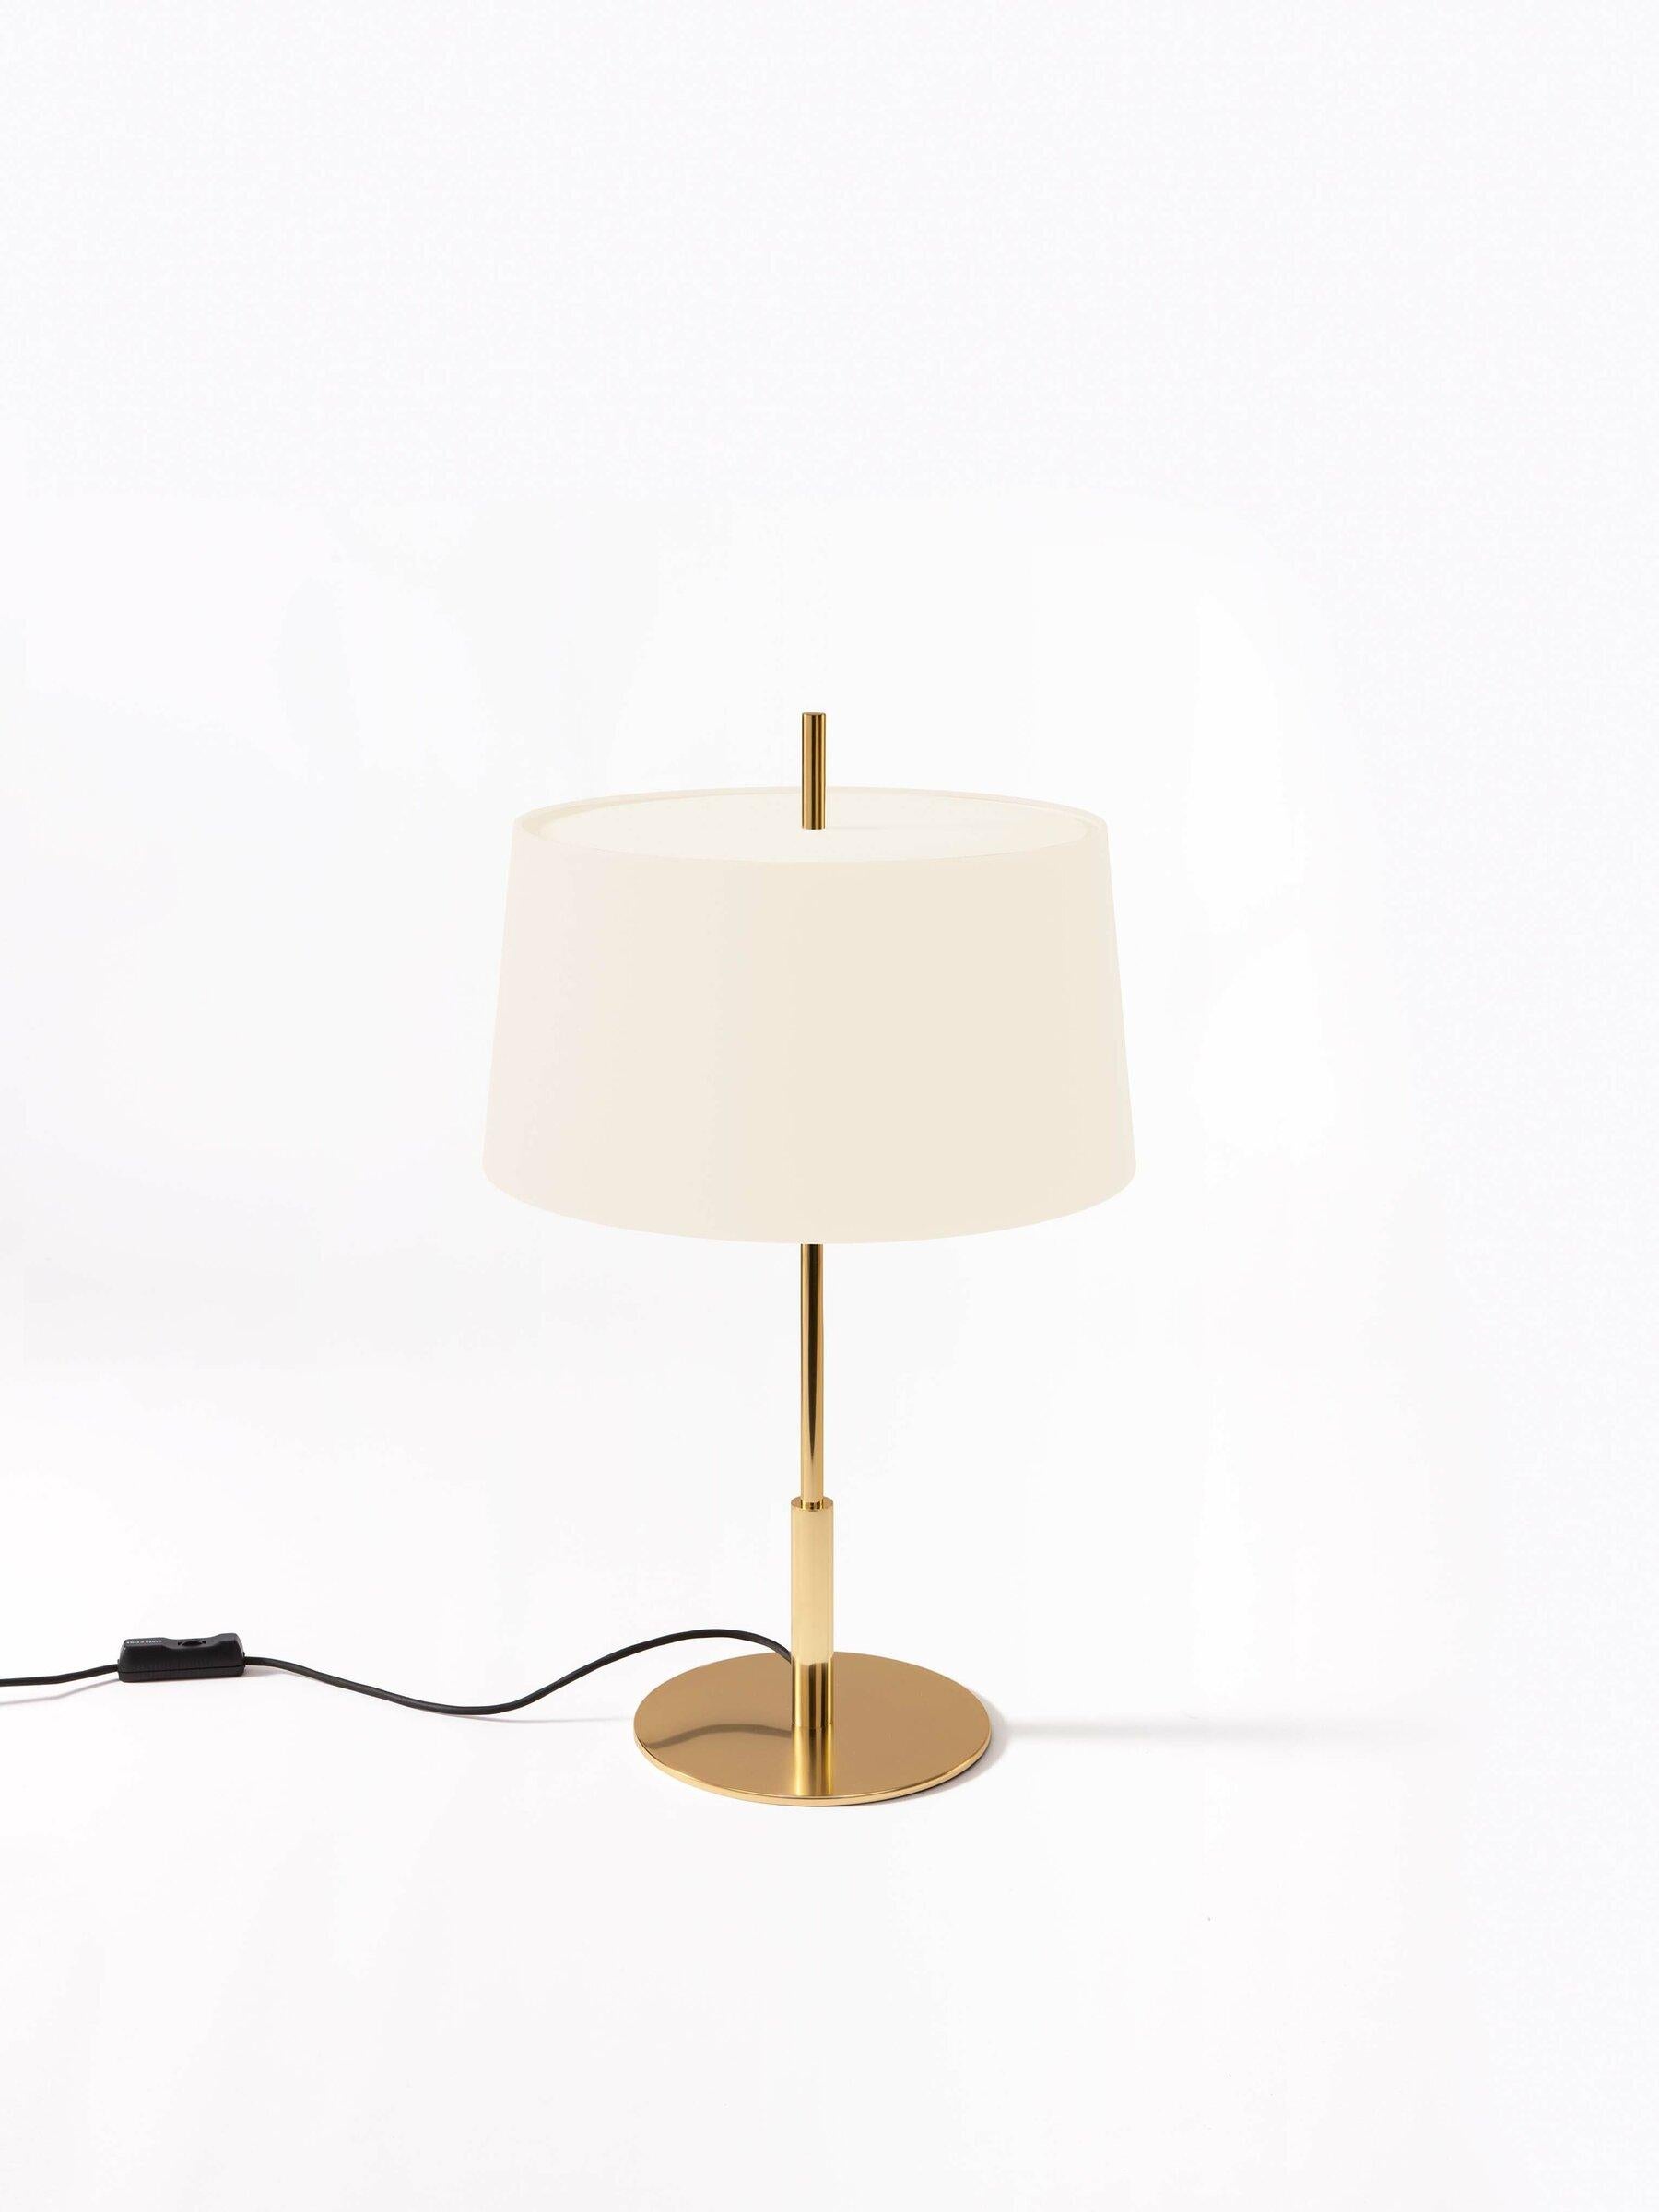 Gold Diana menor table lamp by Federico Correa, Alfonso Milá, Miguel Milá
Dimensions: D 40 x H 66 cm
Materials: White linen, metal.
Available in black or white lampshade and in gold or nickel finish.

In keeping with the calling of its